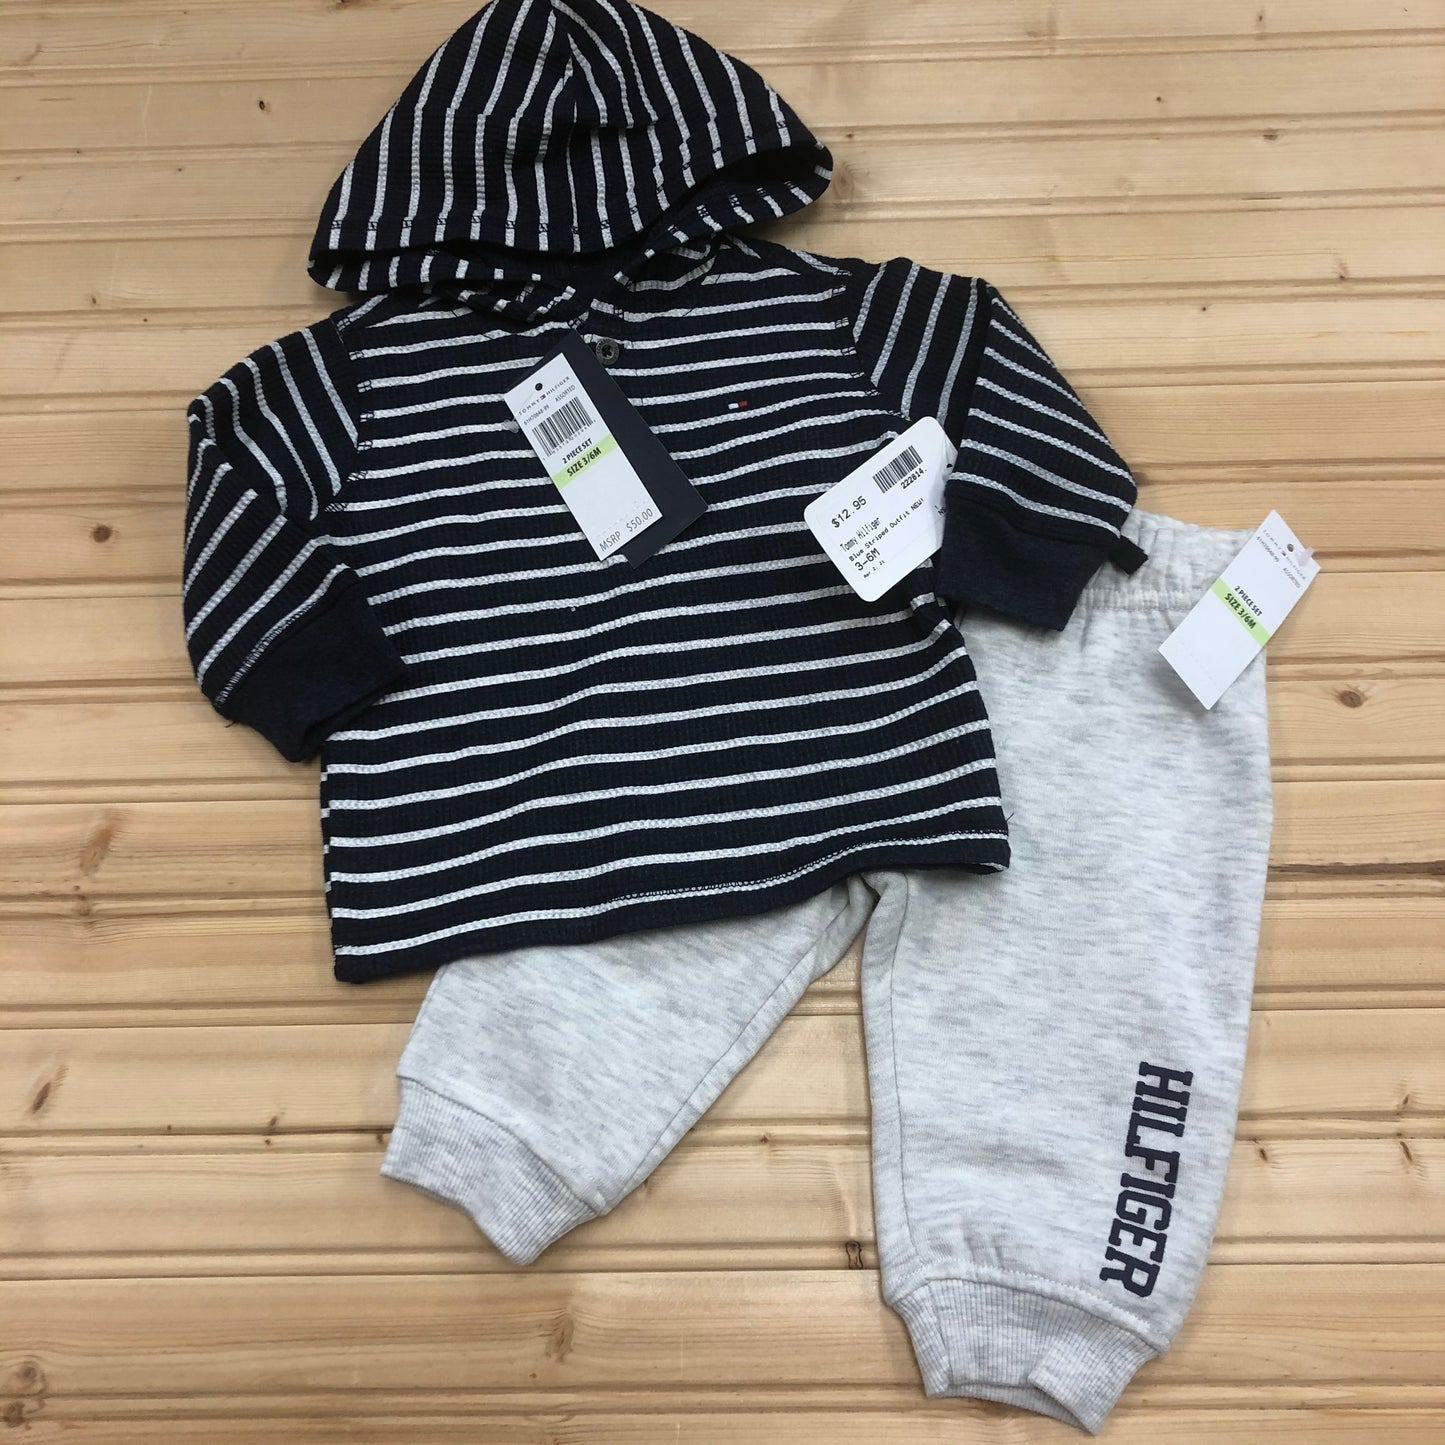 Blue Striped Outfit NEW!